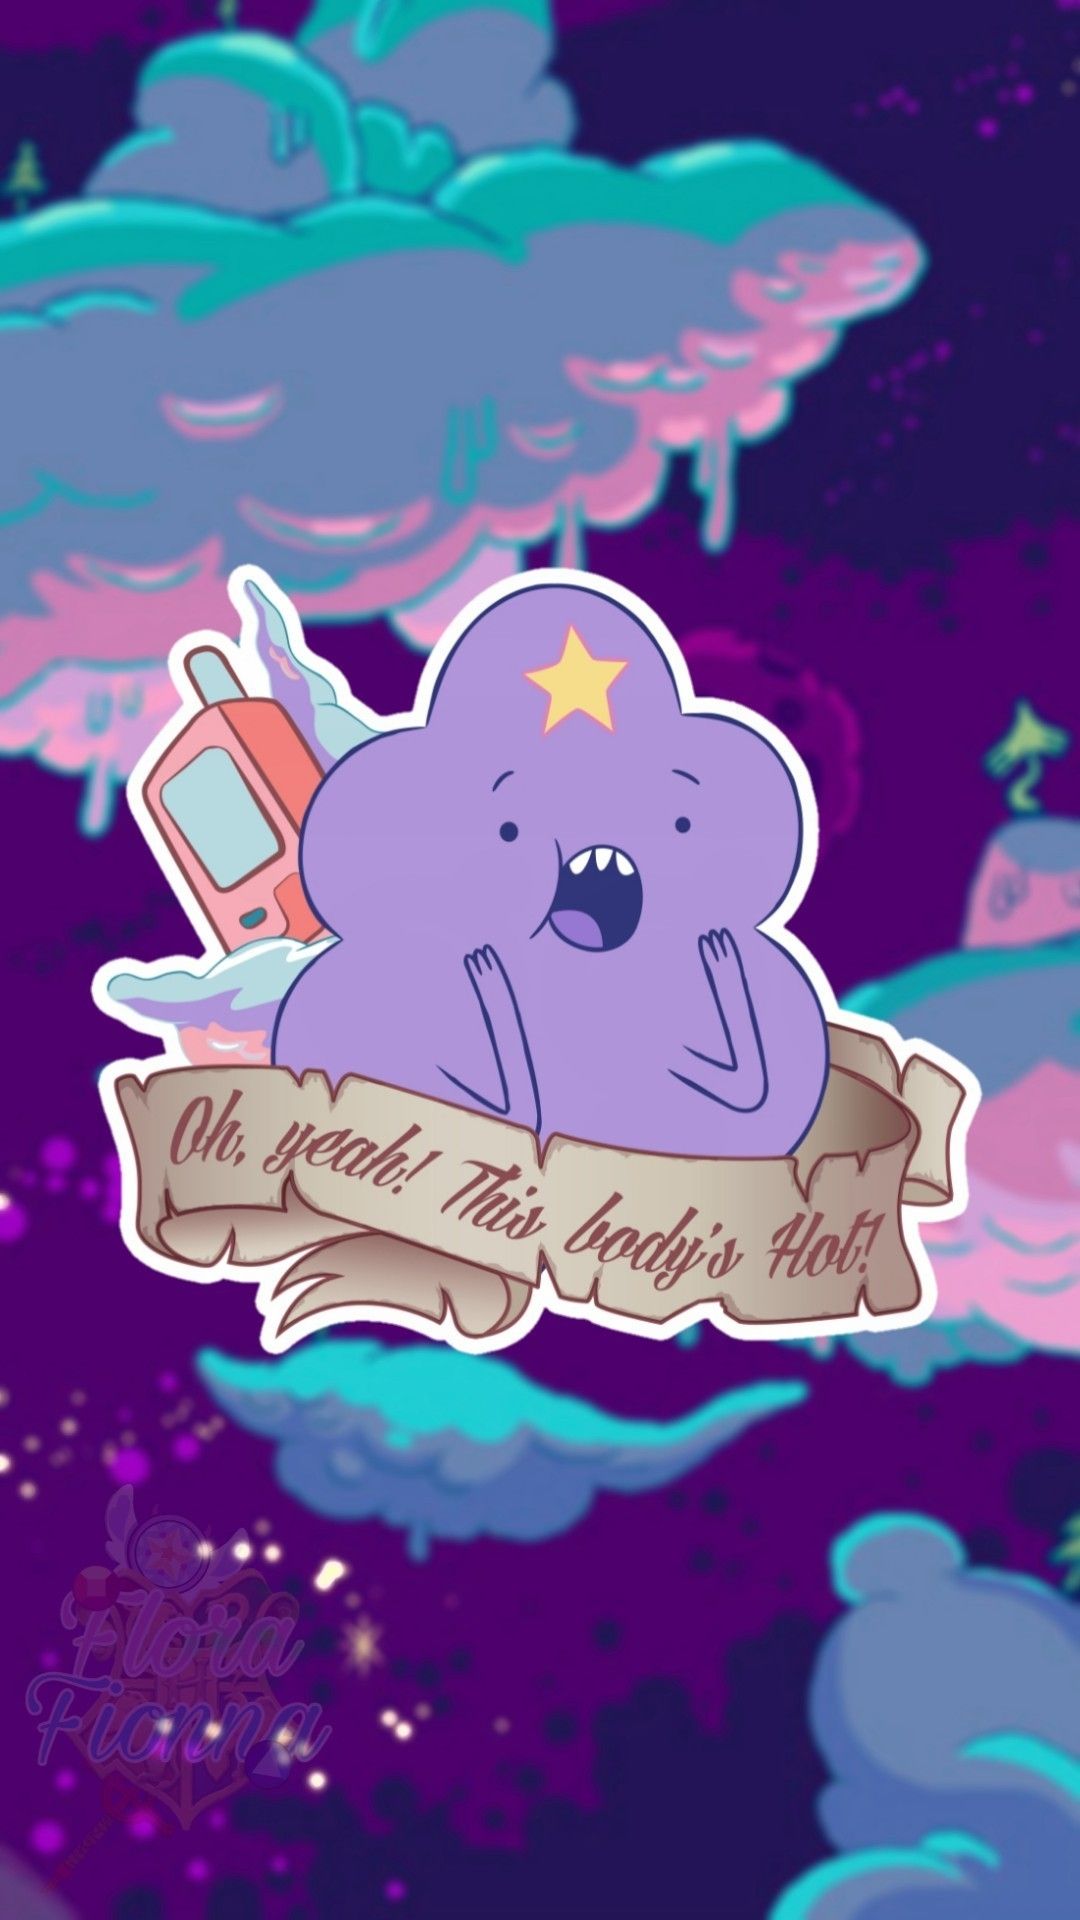 Adventure Time Lumpy Space Princess wallpaper for iPhone with resolution 1080x1920 pixel. You can make this wallpaper for your iPhone 5, 6, 7, 8, X backgrounds, Mobile Screensaver, or iPad Lock Screen - Adventure Time